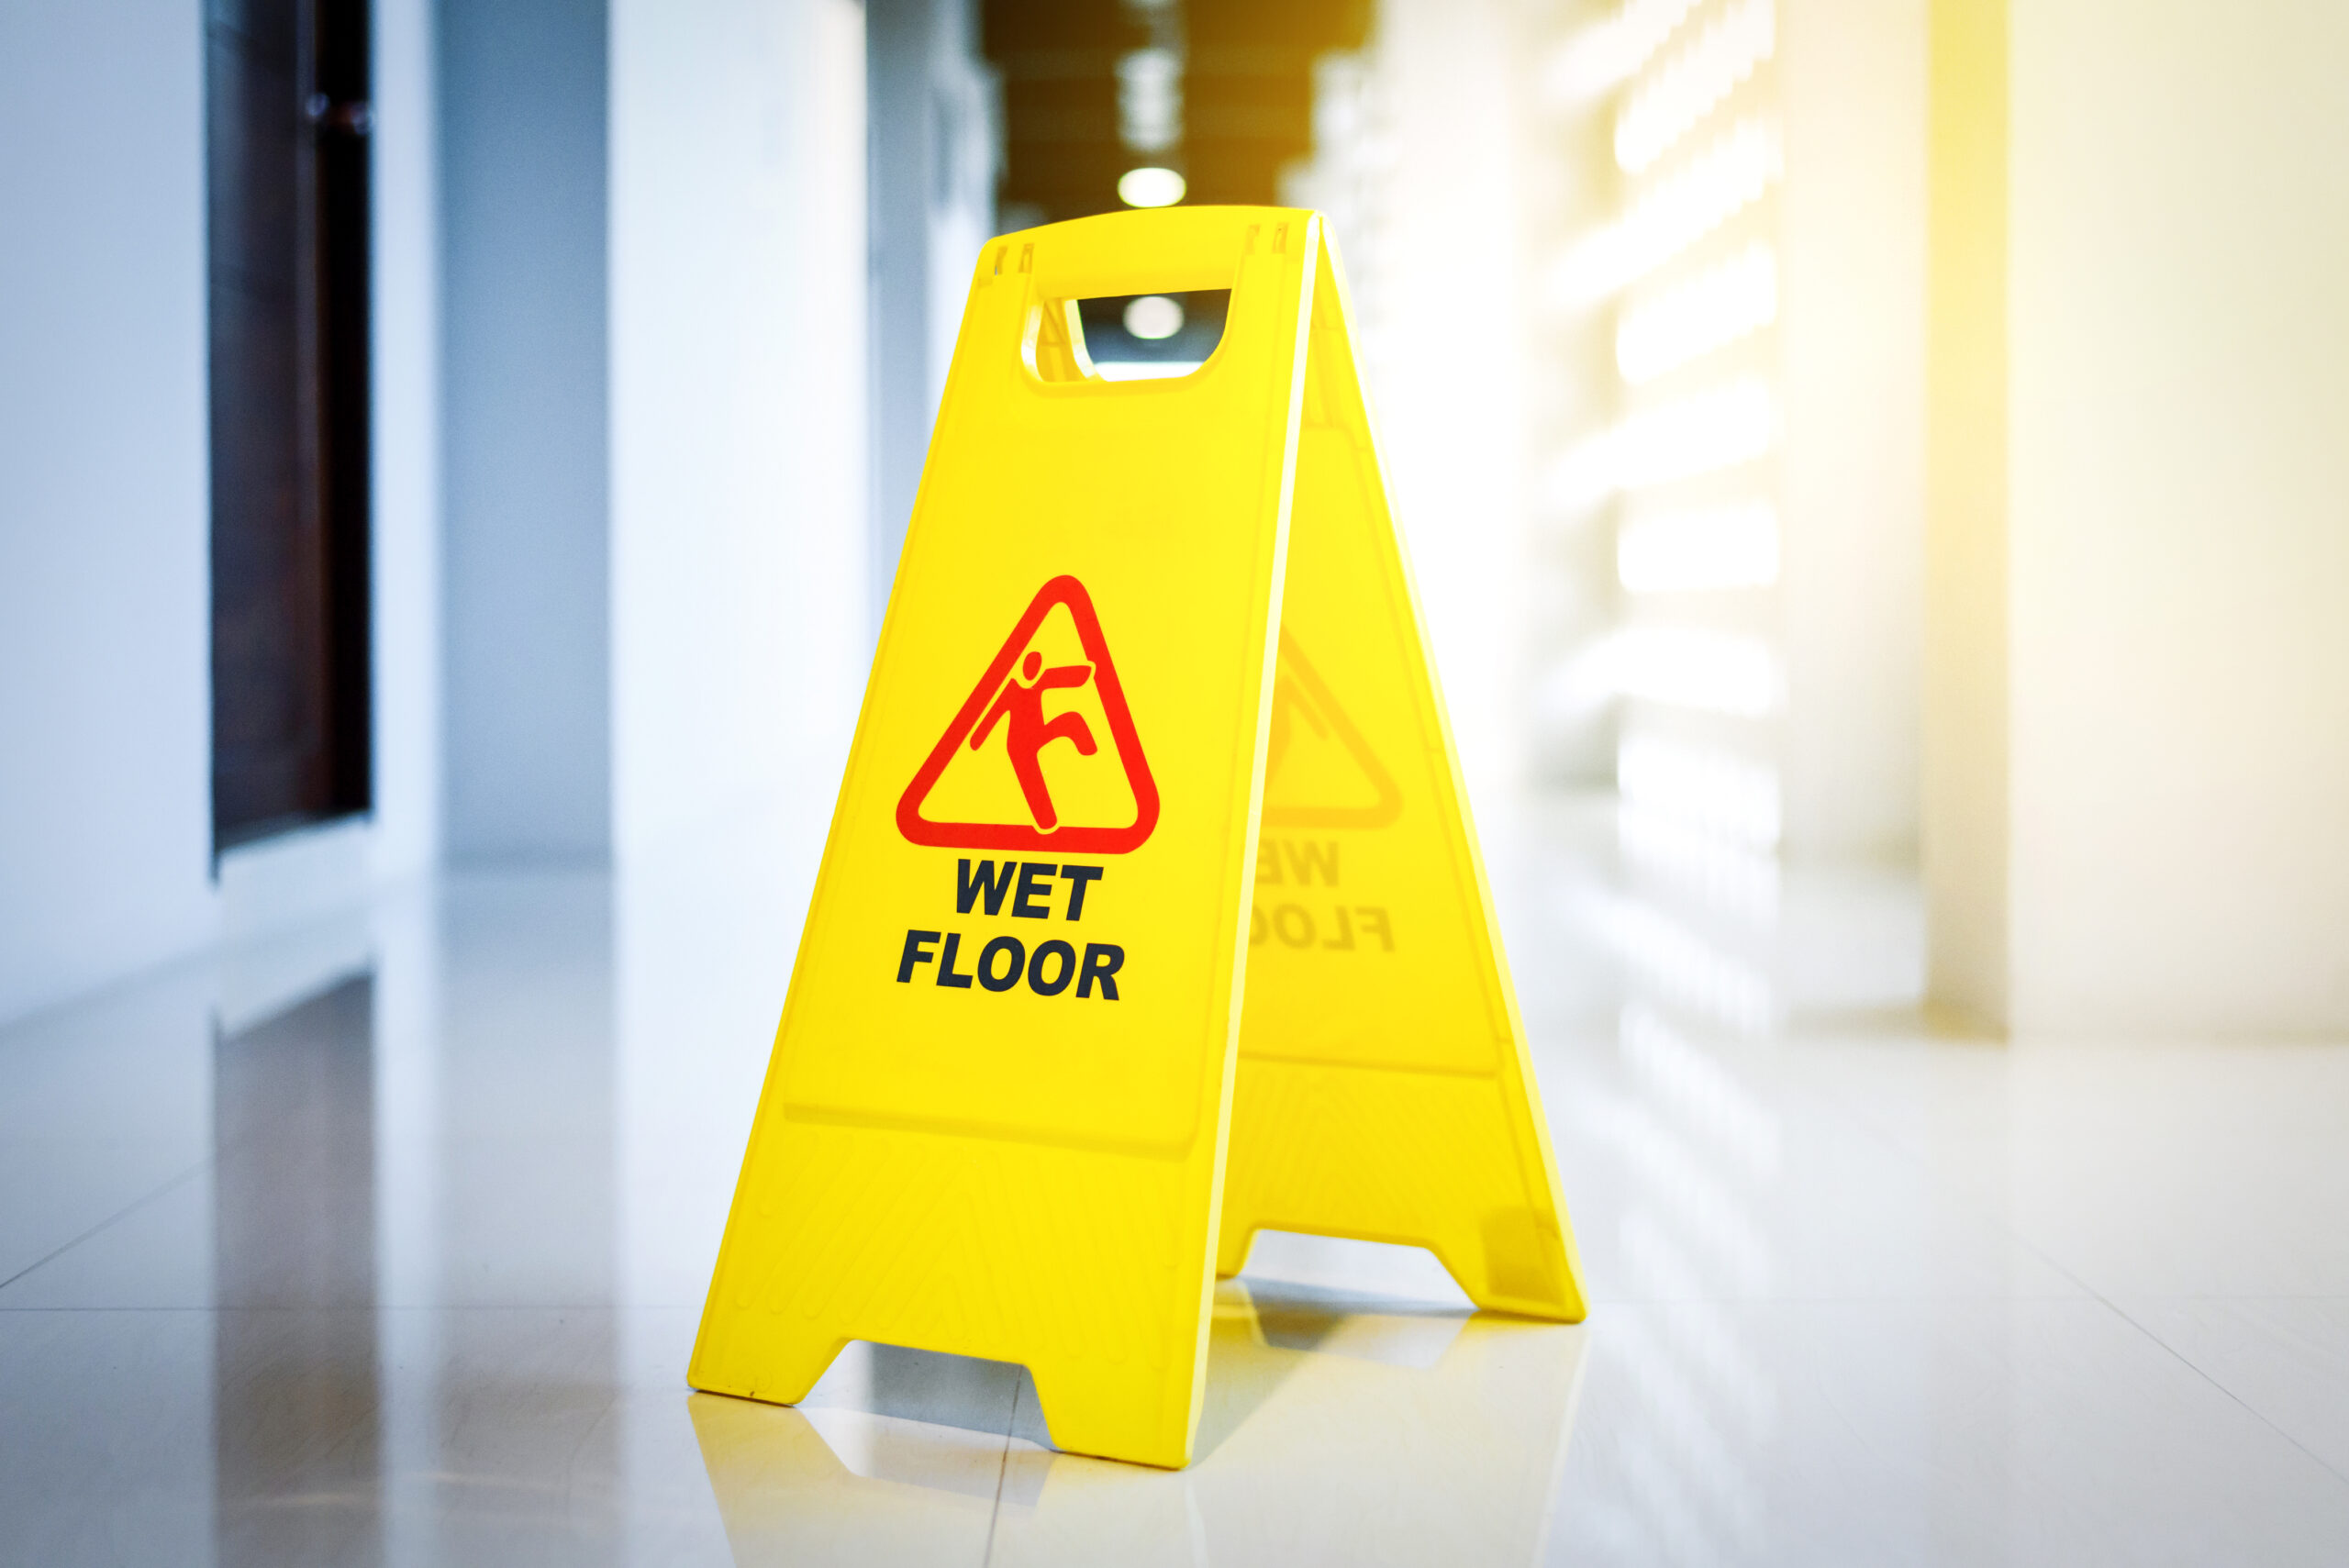 Wet floor warning sign on a tile floor warning people to be careful of slip and fall injuries